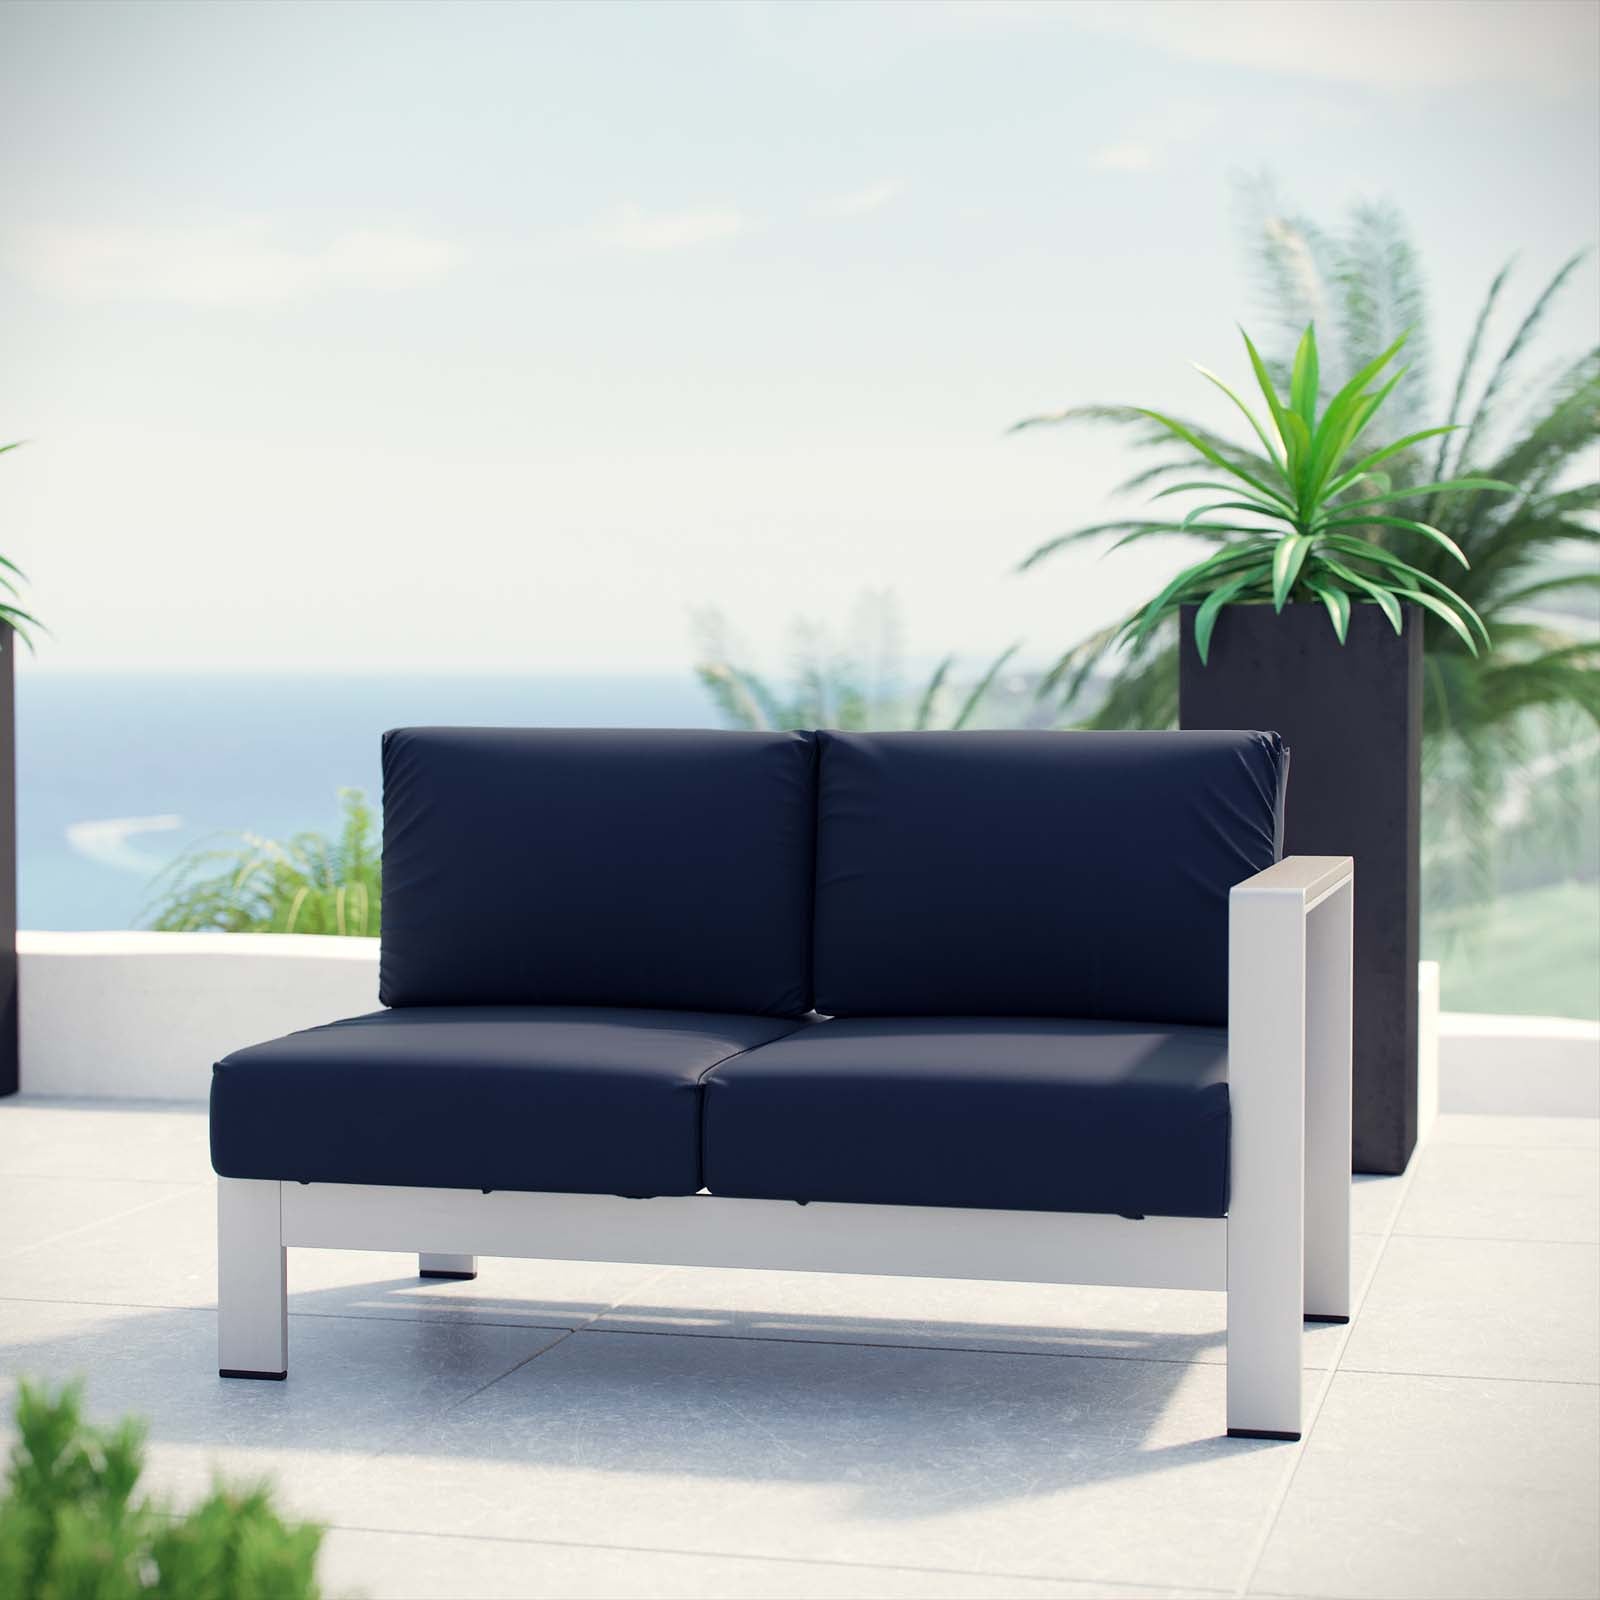 Shore Right-Arm Corner Sectional Outdoor Patio Aluminum Loveseat - East Shore Modern Home Furnishings